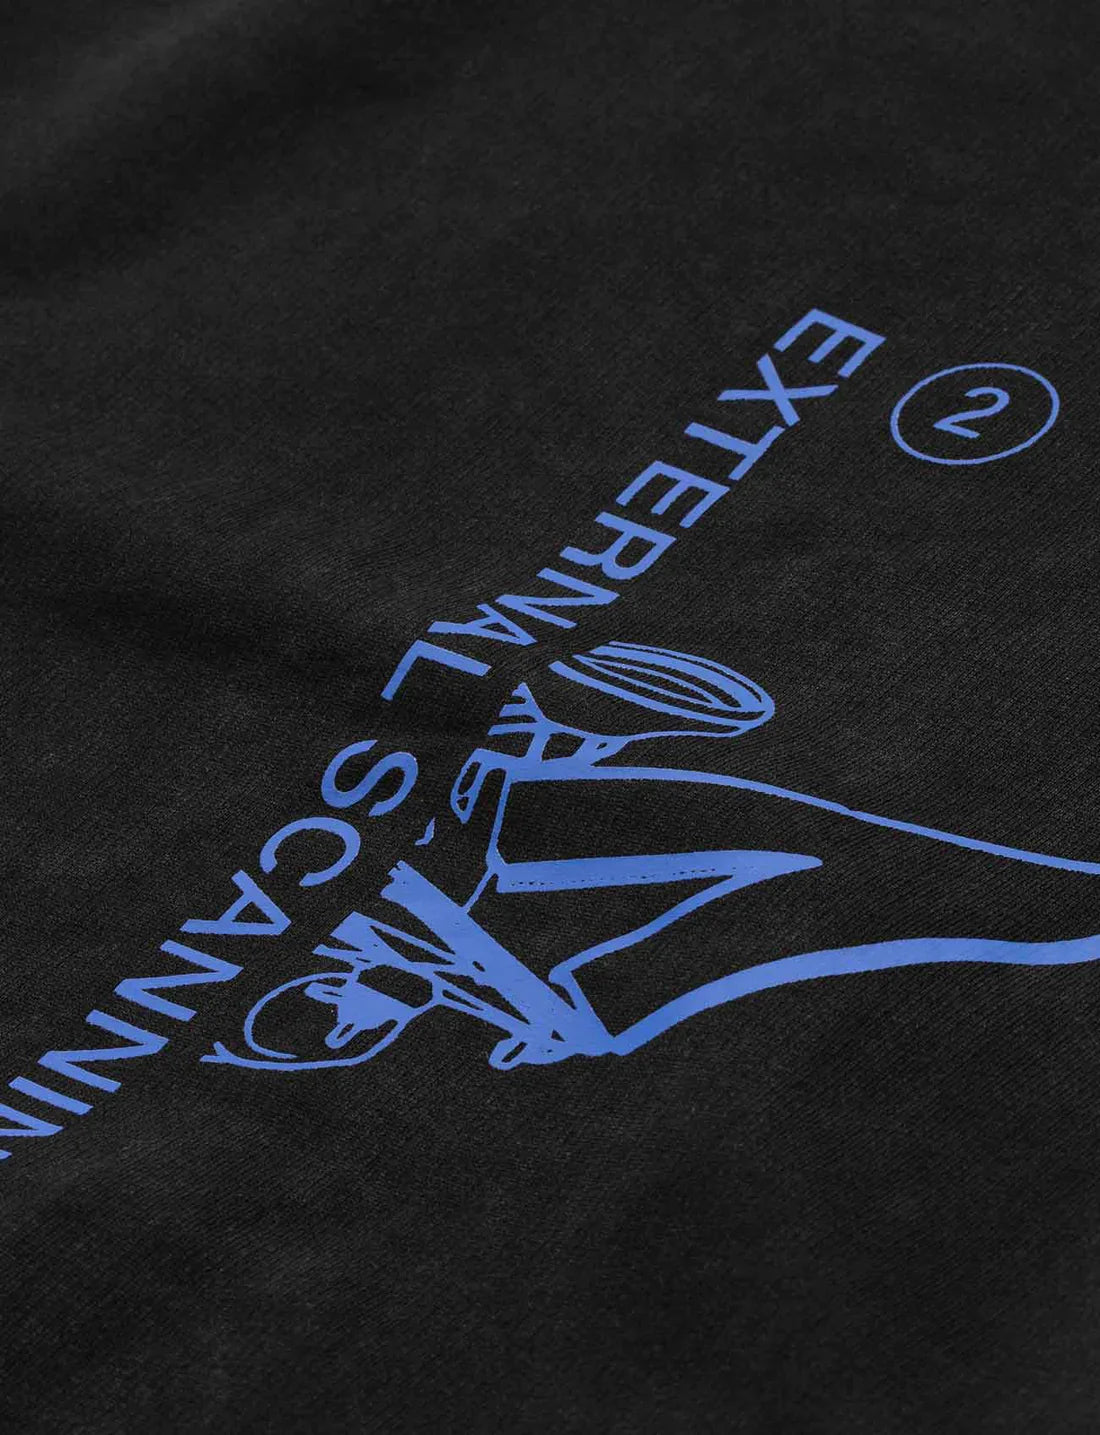 Close-up of the backside of a black hoodie with blue graphic text angled downwards, showcasing the 'Drone Repair Shop' design detail.